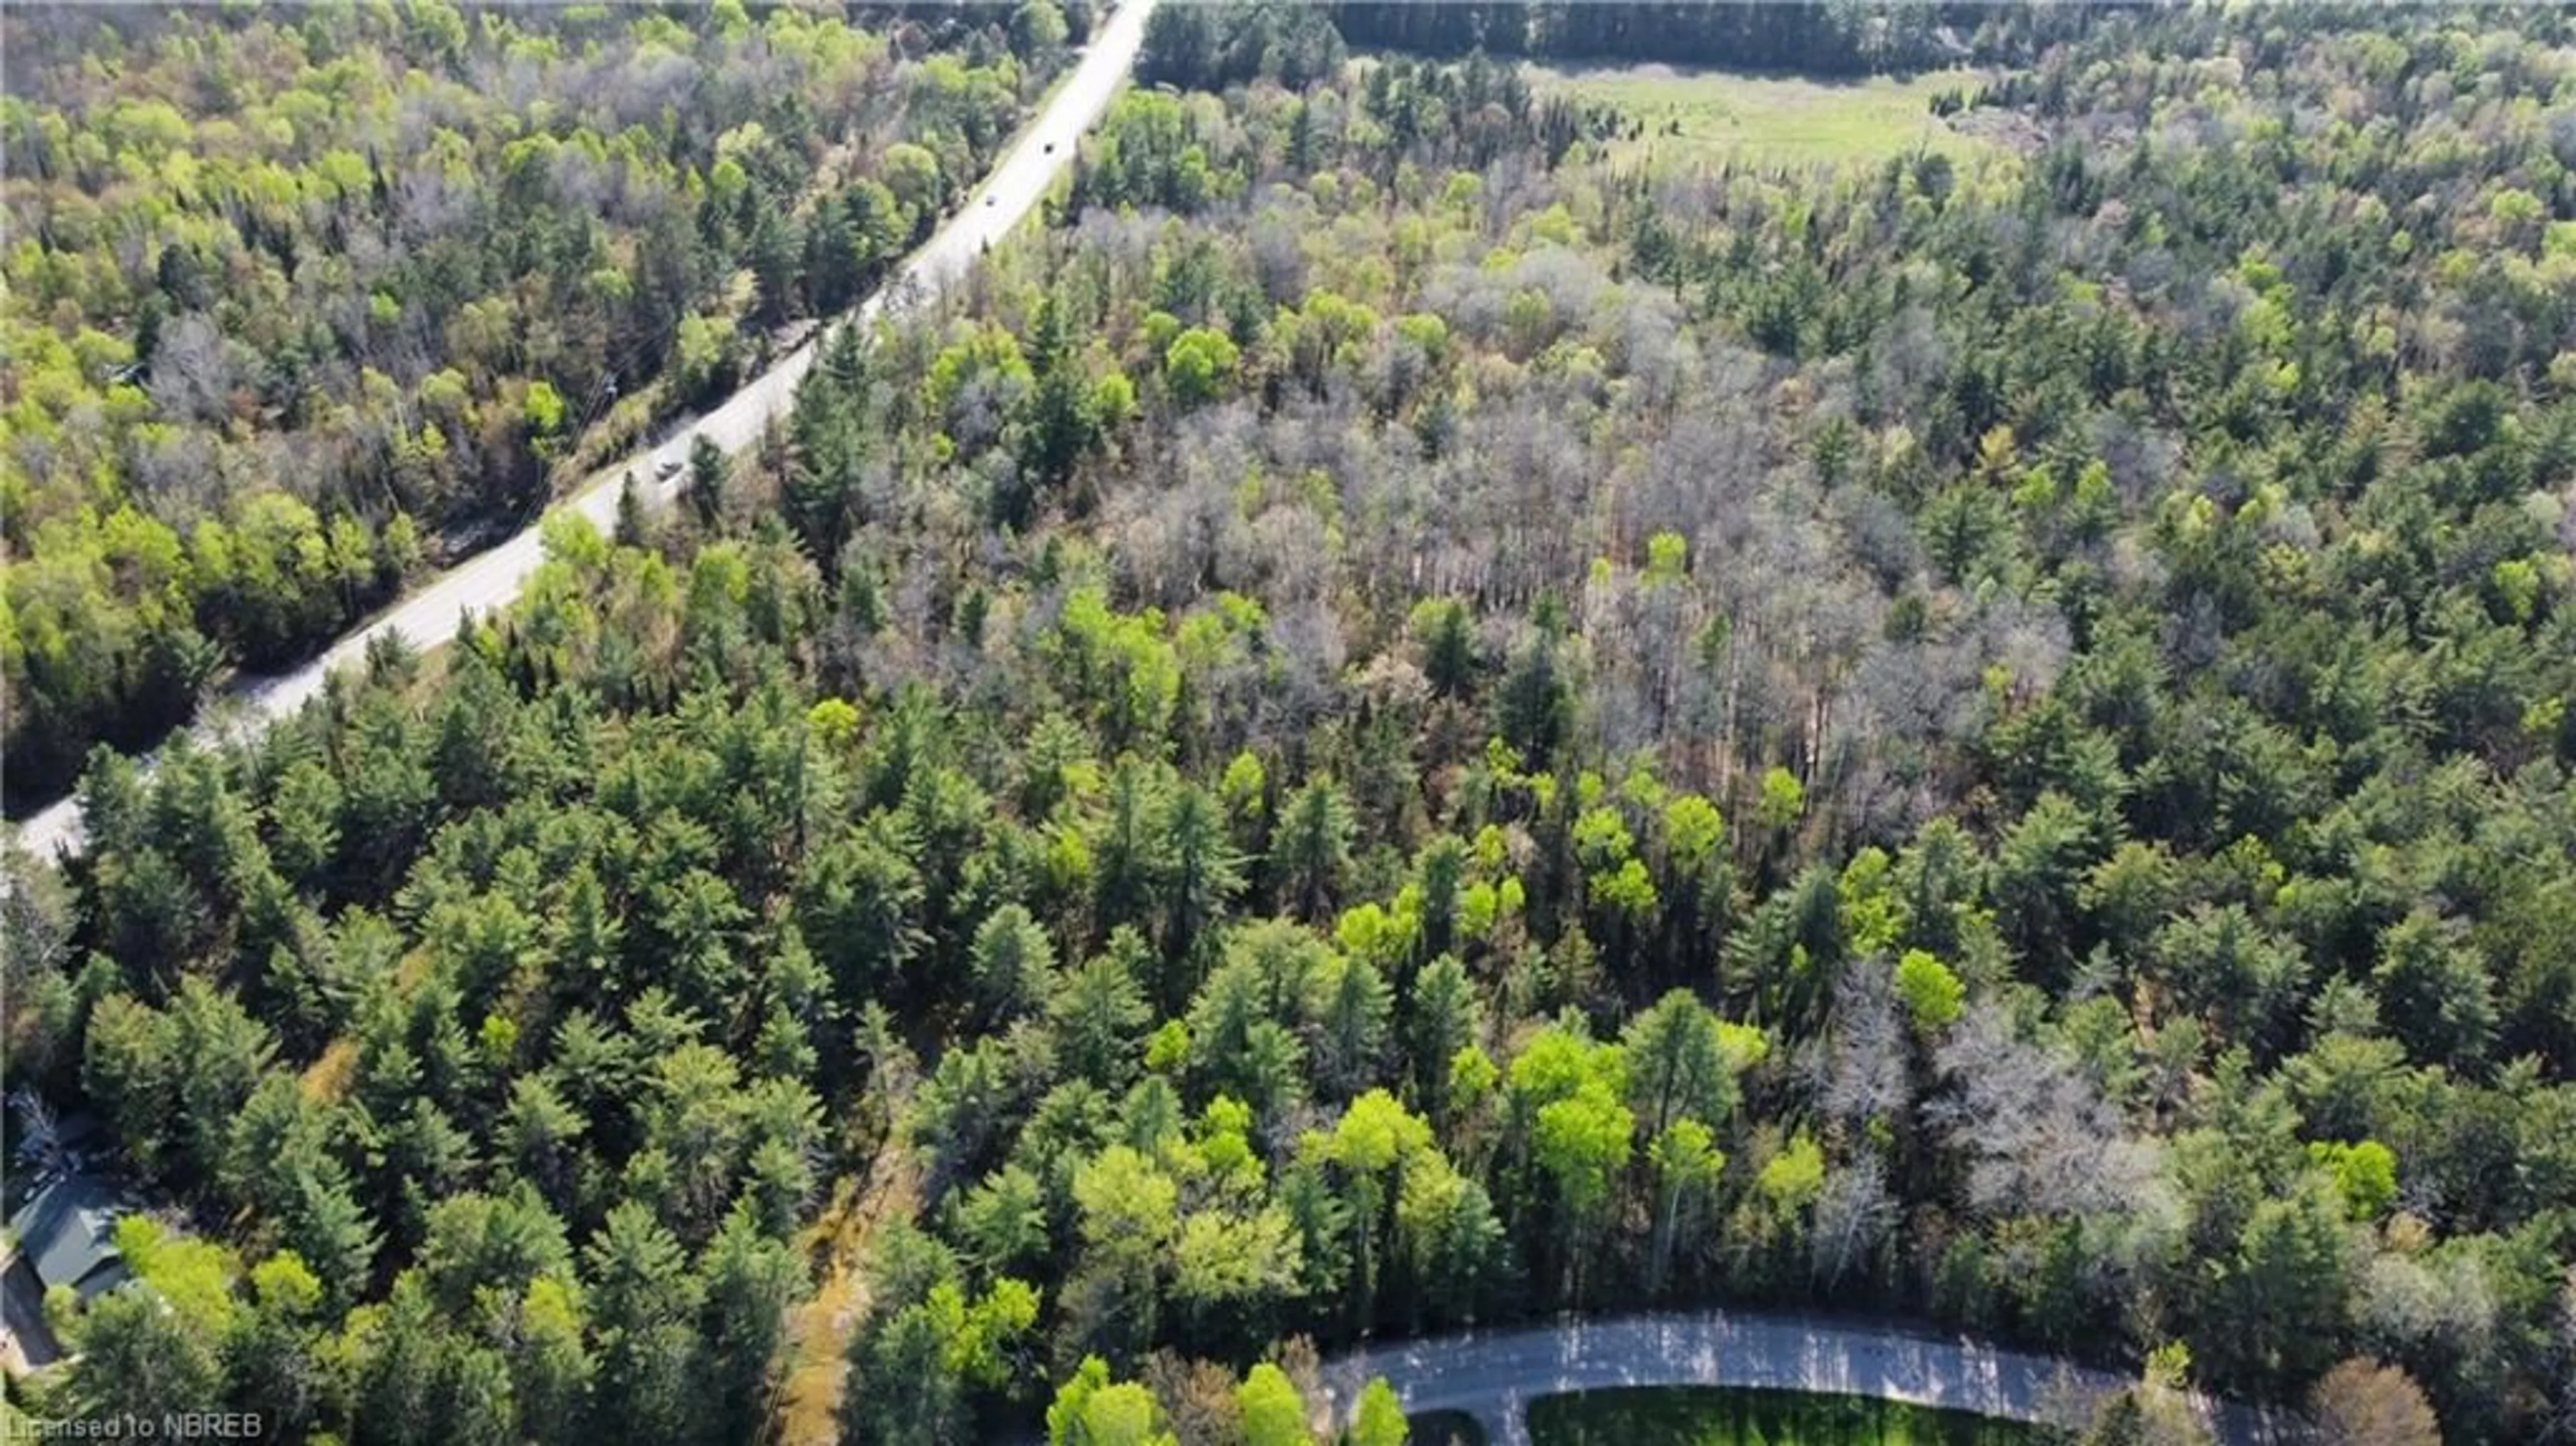 Forest view for PART 2 Lighthouse Rd, Callander Ontario P0H 1H0